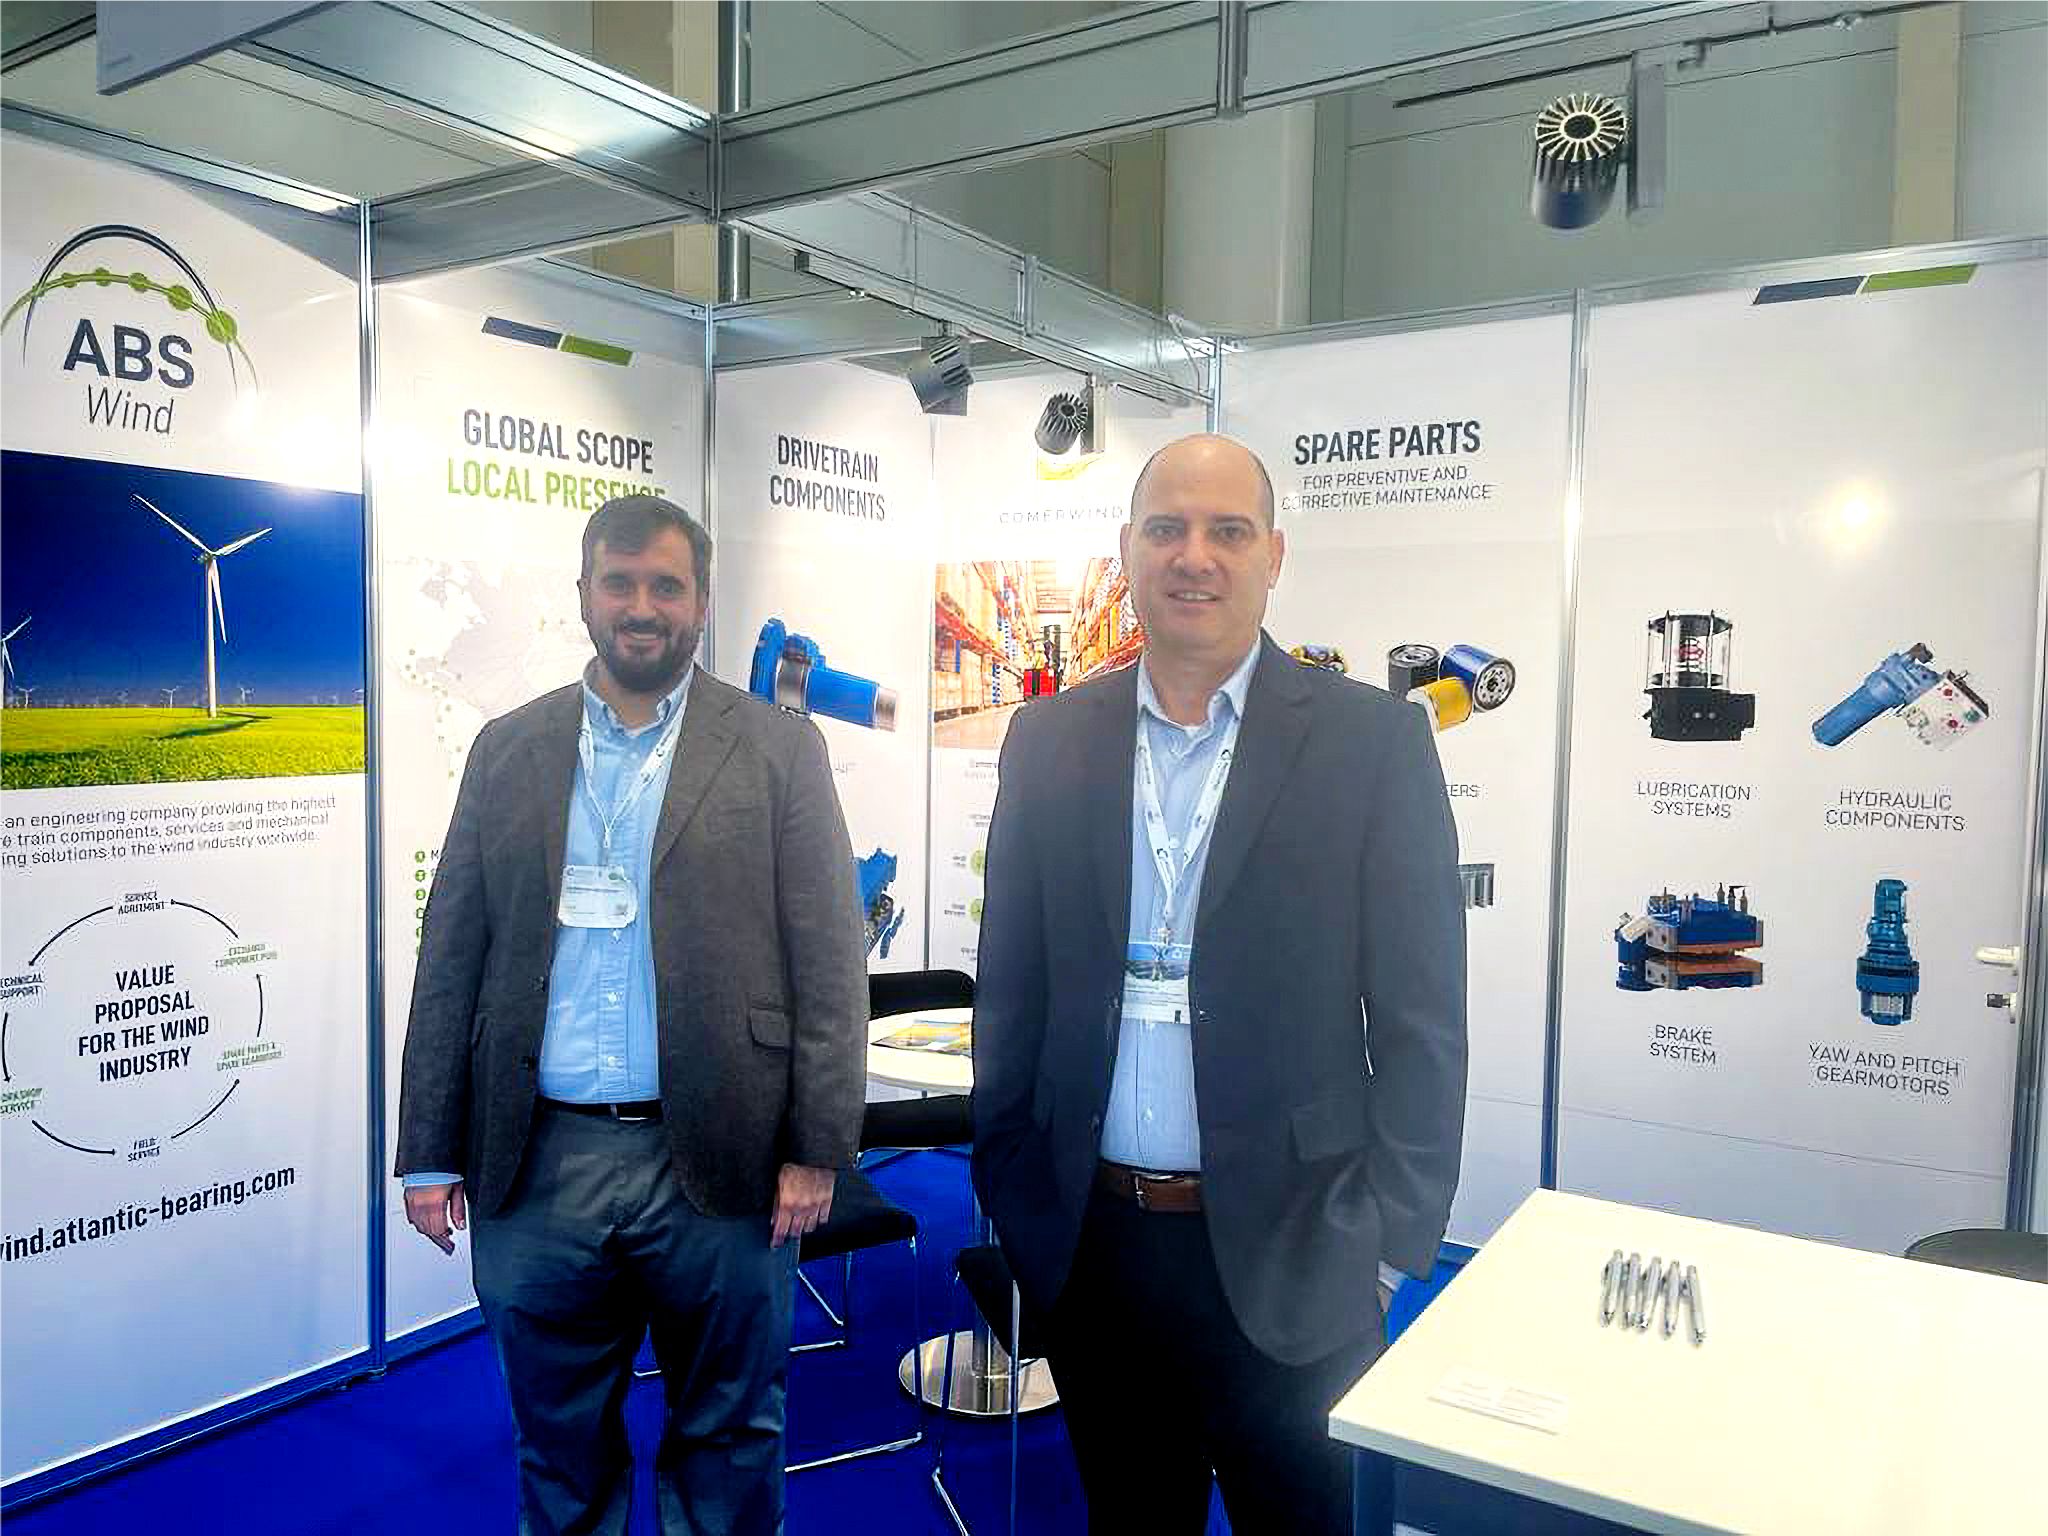 Guillermo Anclares and Nelson Carrodeguas at the booth of ABS Wind and Comerwind at WindEnergy Hamburg